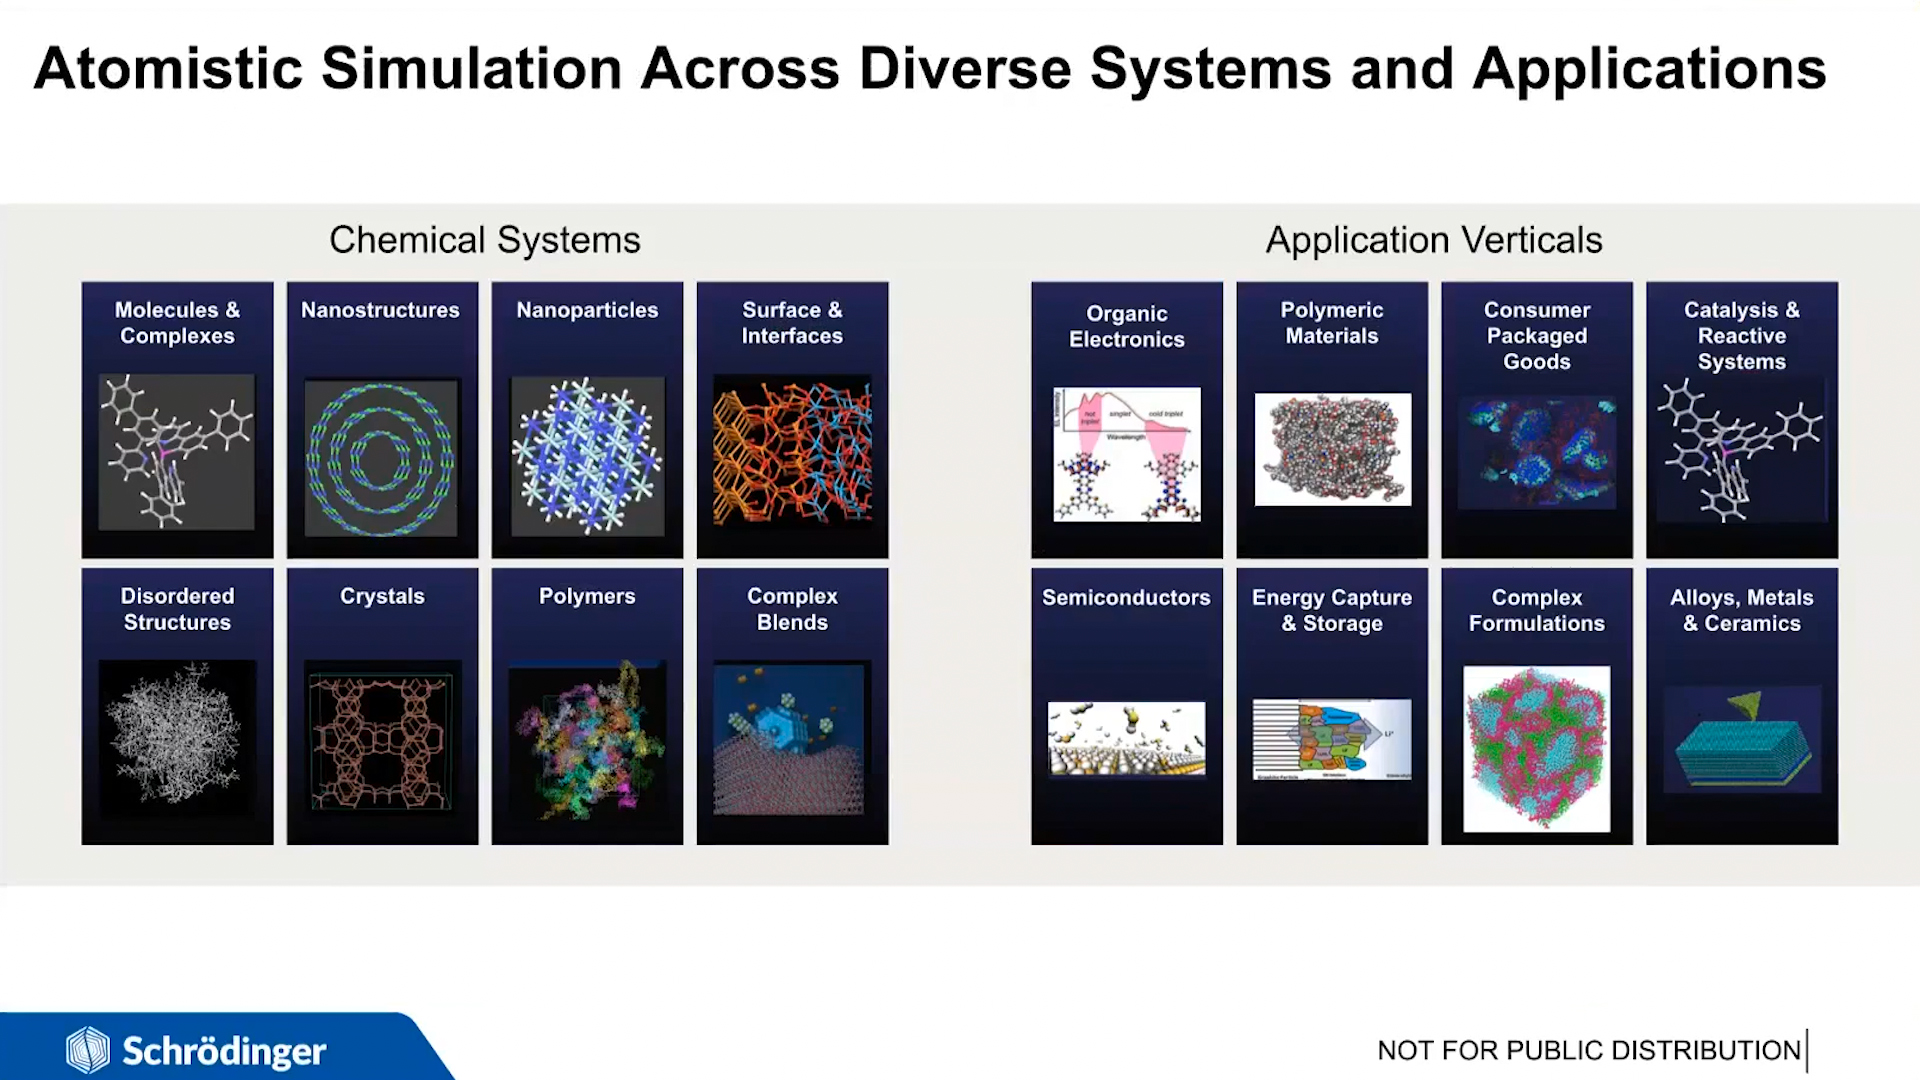 Atomistic Simulation Across Diverse Systems and Applications